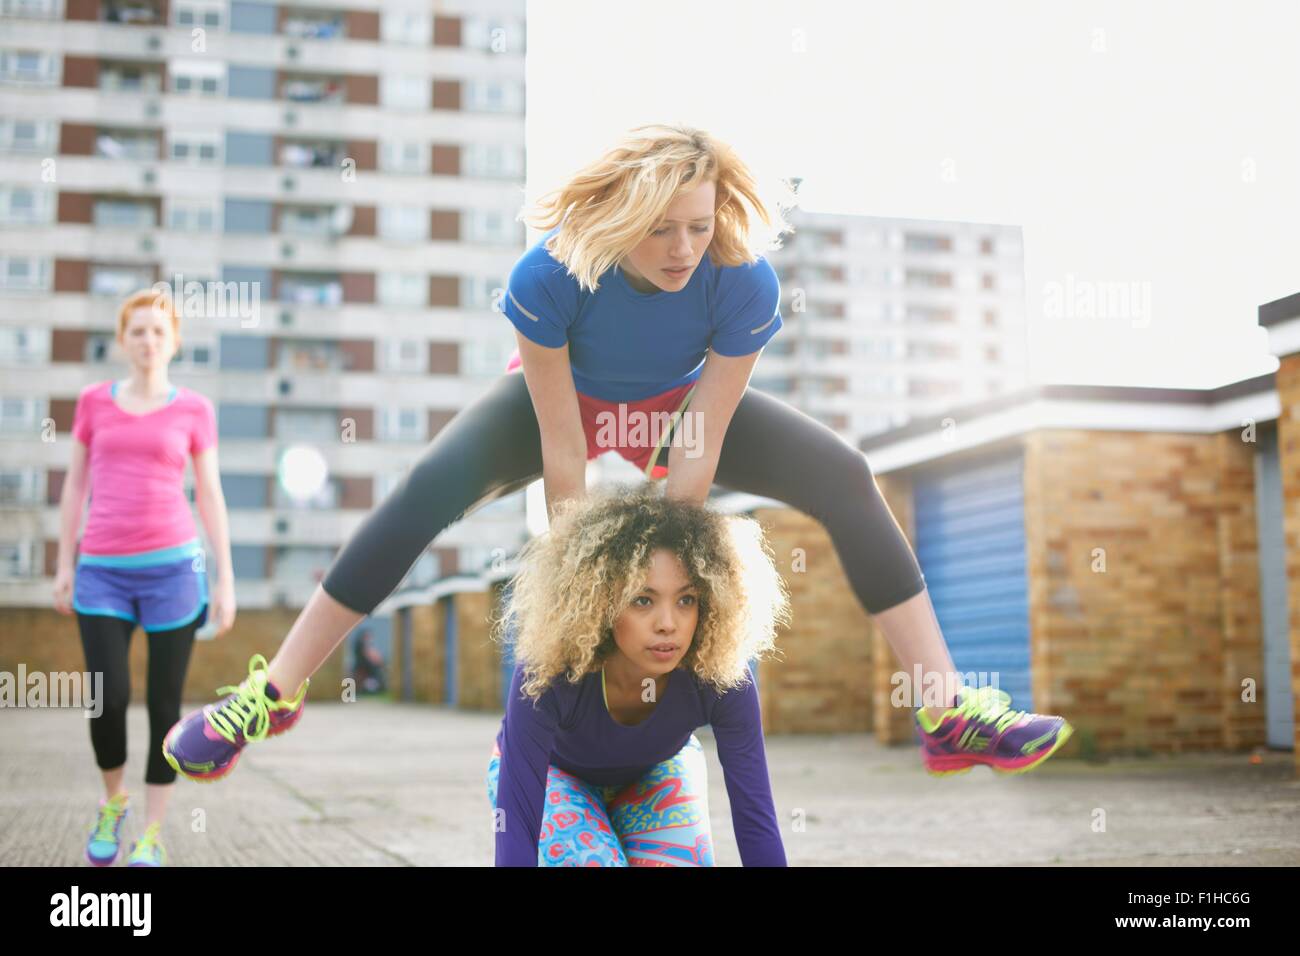 Three women exercising together wearing sports clothing and playing leap frog Stock Photo